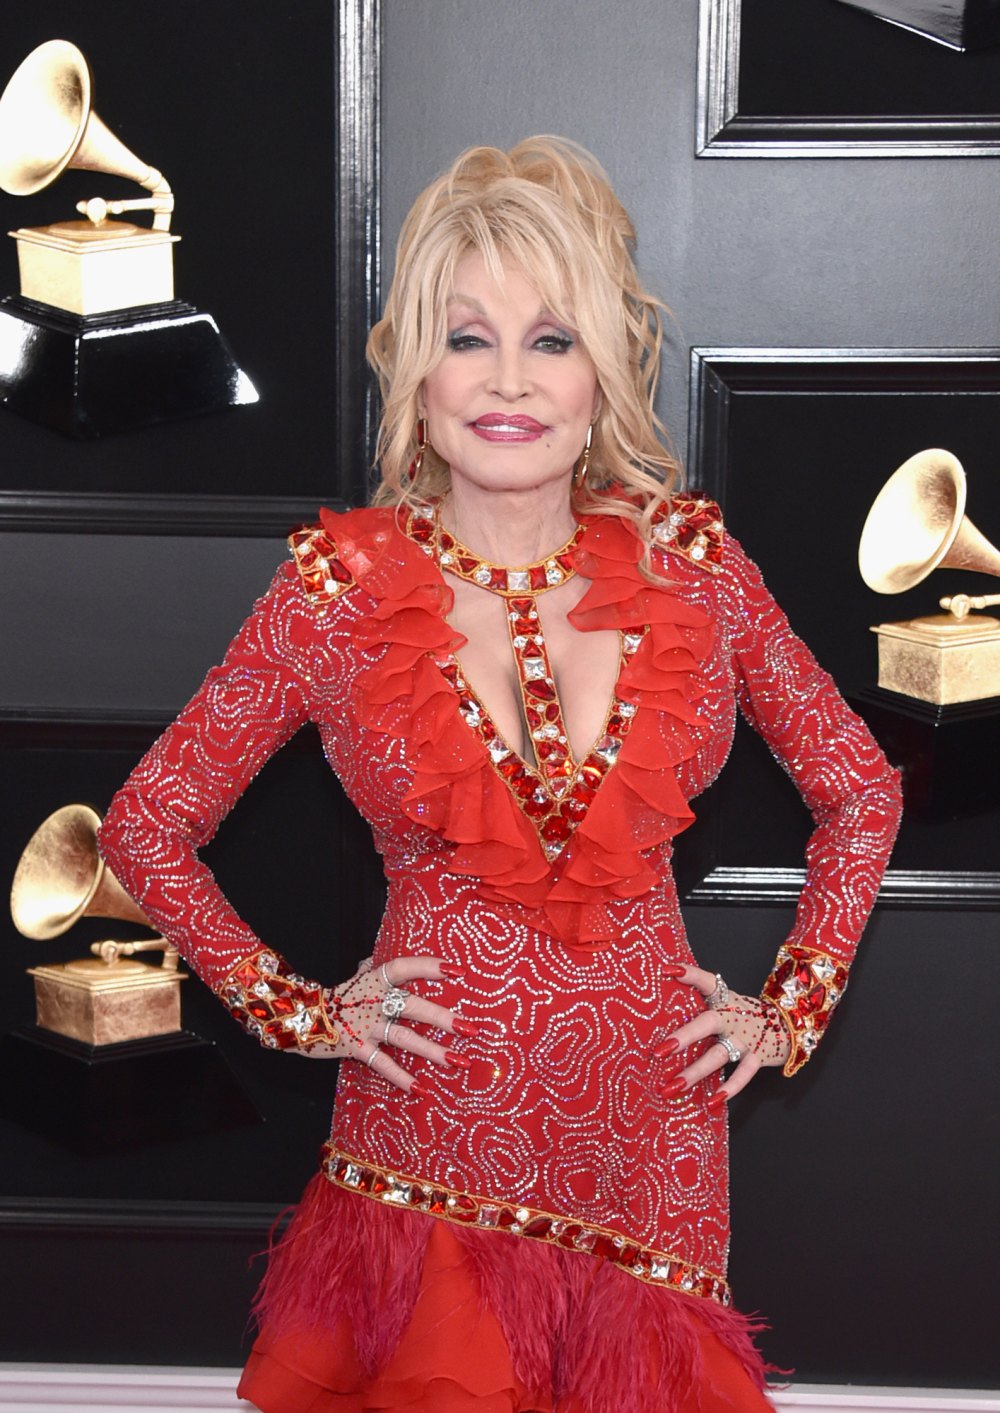 Dolly Parton revealed that she would receive physical and verbal punishment from her grandfather